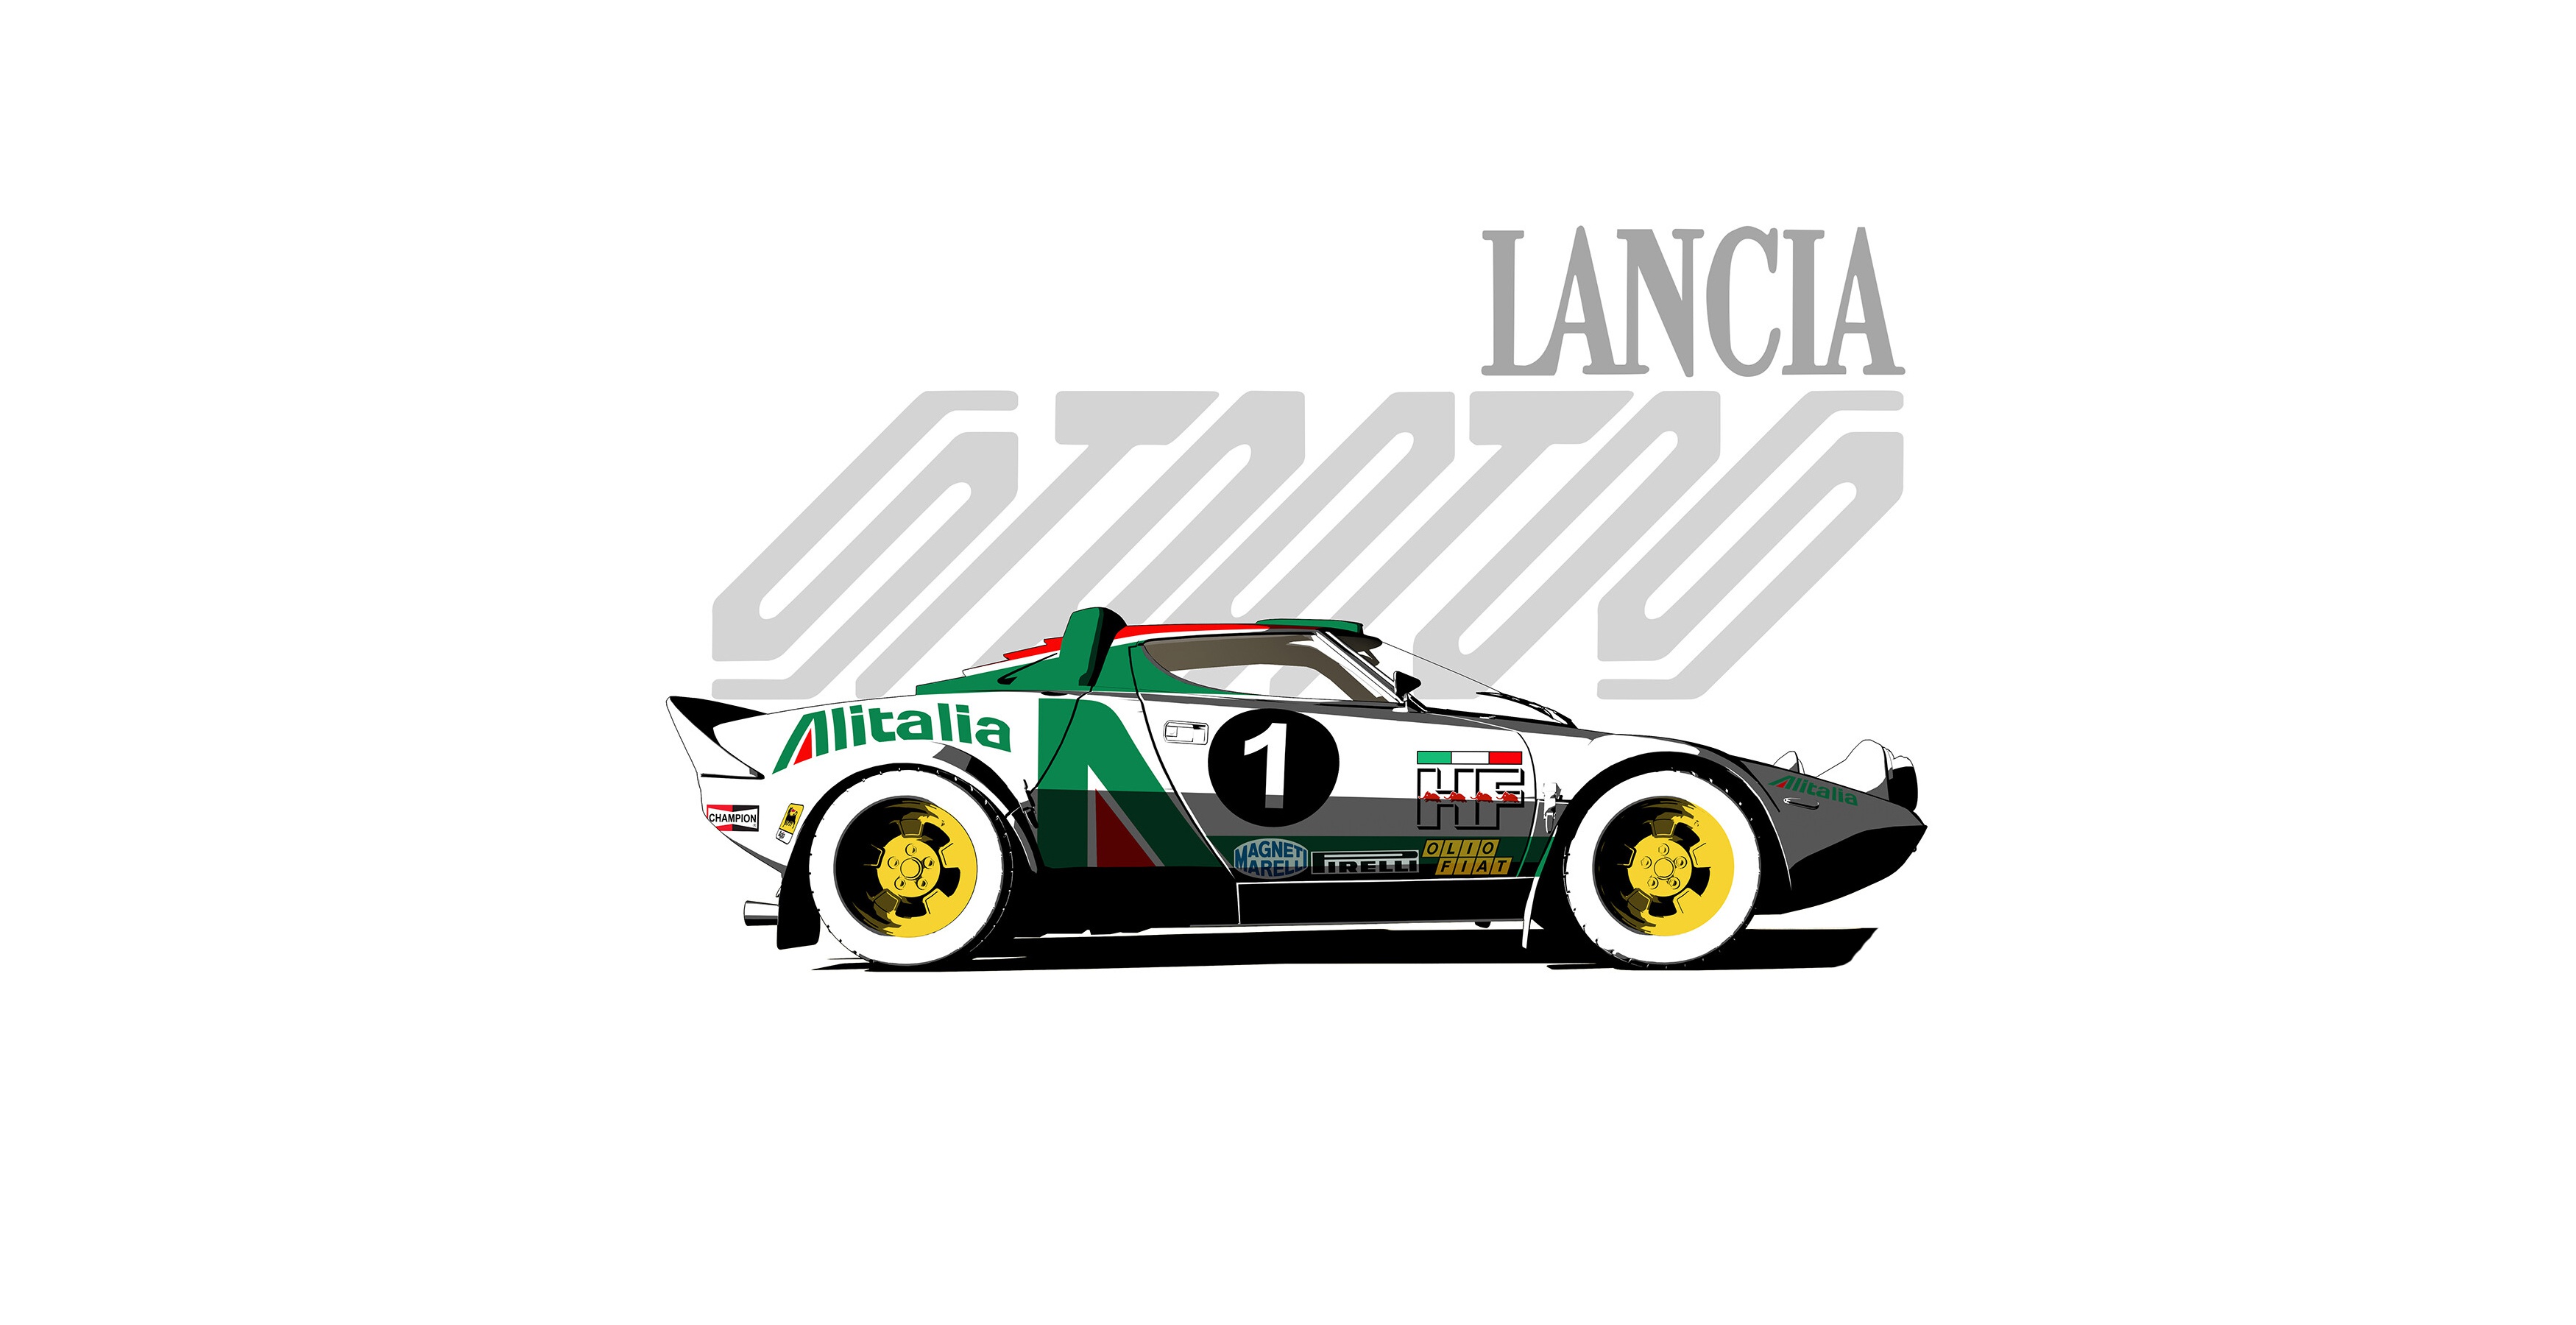 General 3500x1800 car artwork vehicle race cars white background simple background Lancia Stratos Italy pop-up headlights Castrol livery side view minimalism sketches livery italian cars Stellantis Lancia (cars)